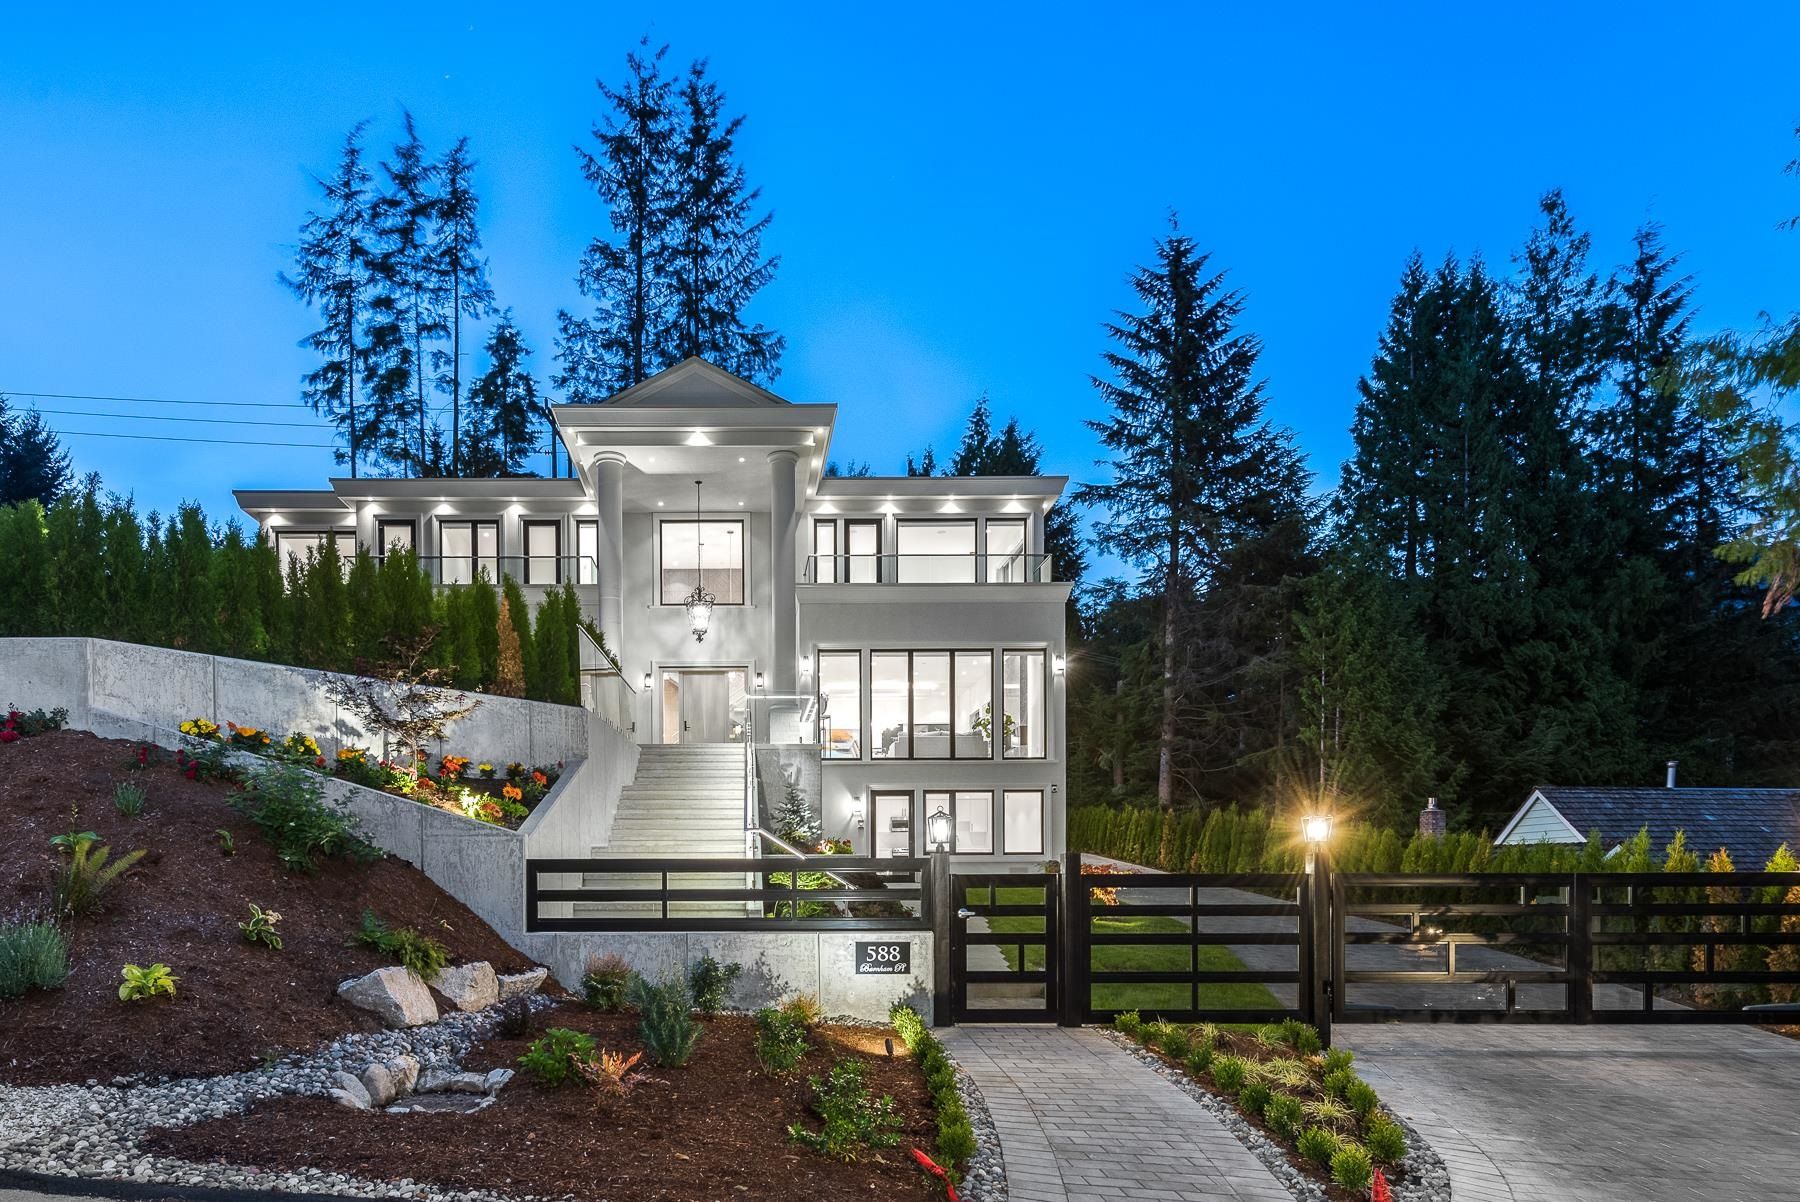 Main Photo: 588 BARNHAM Place in West Vancouver: British Properties House for sale : MLS®# R2609844